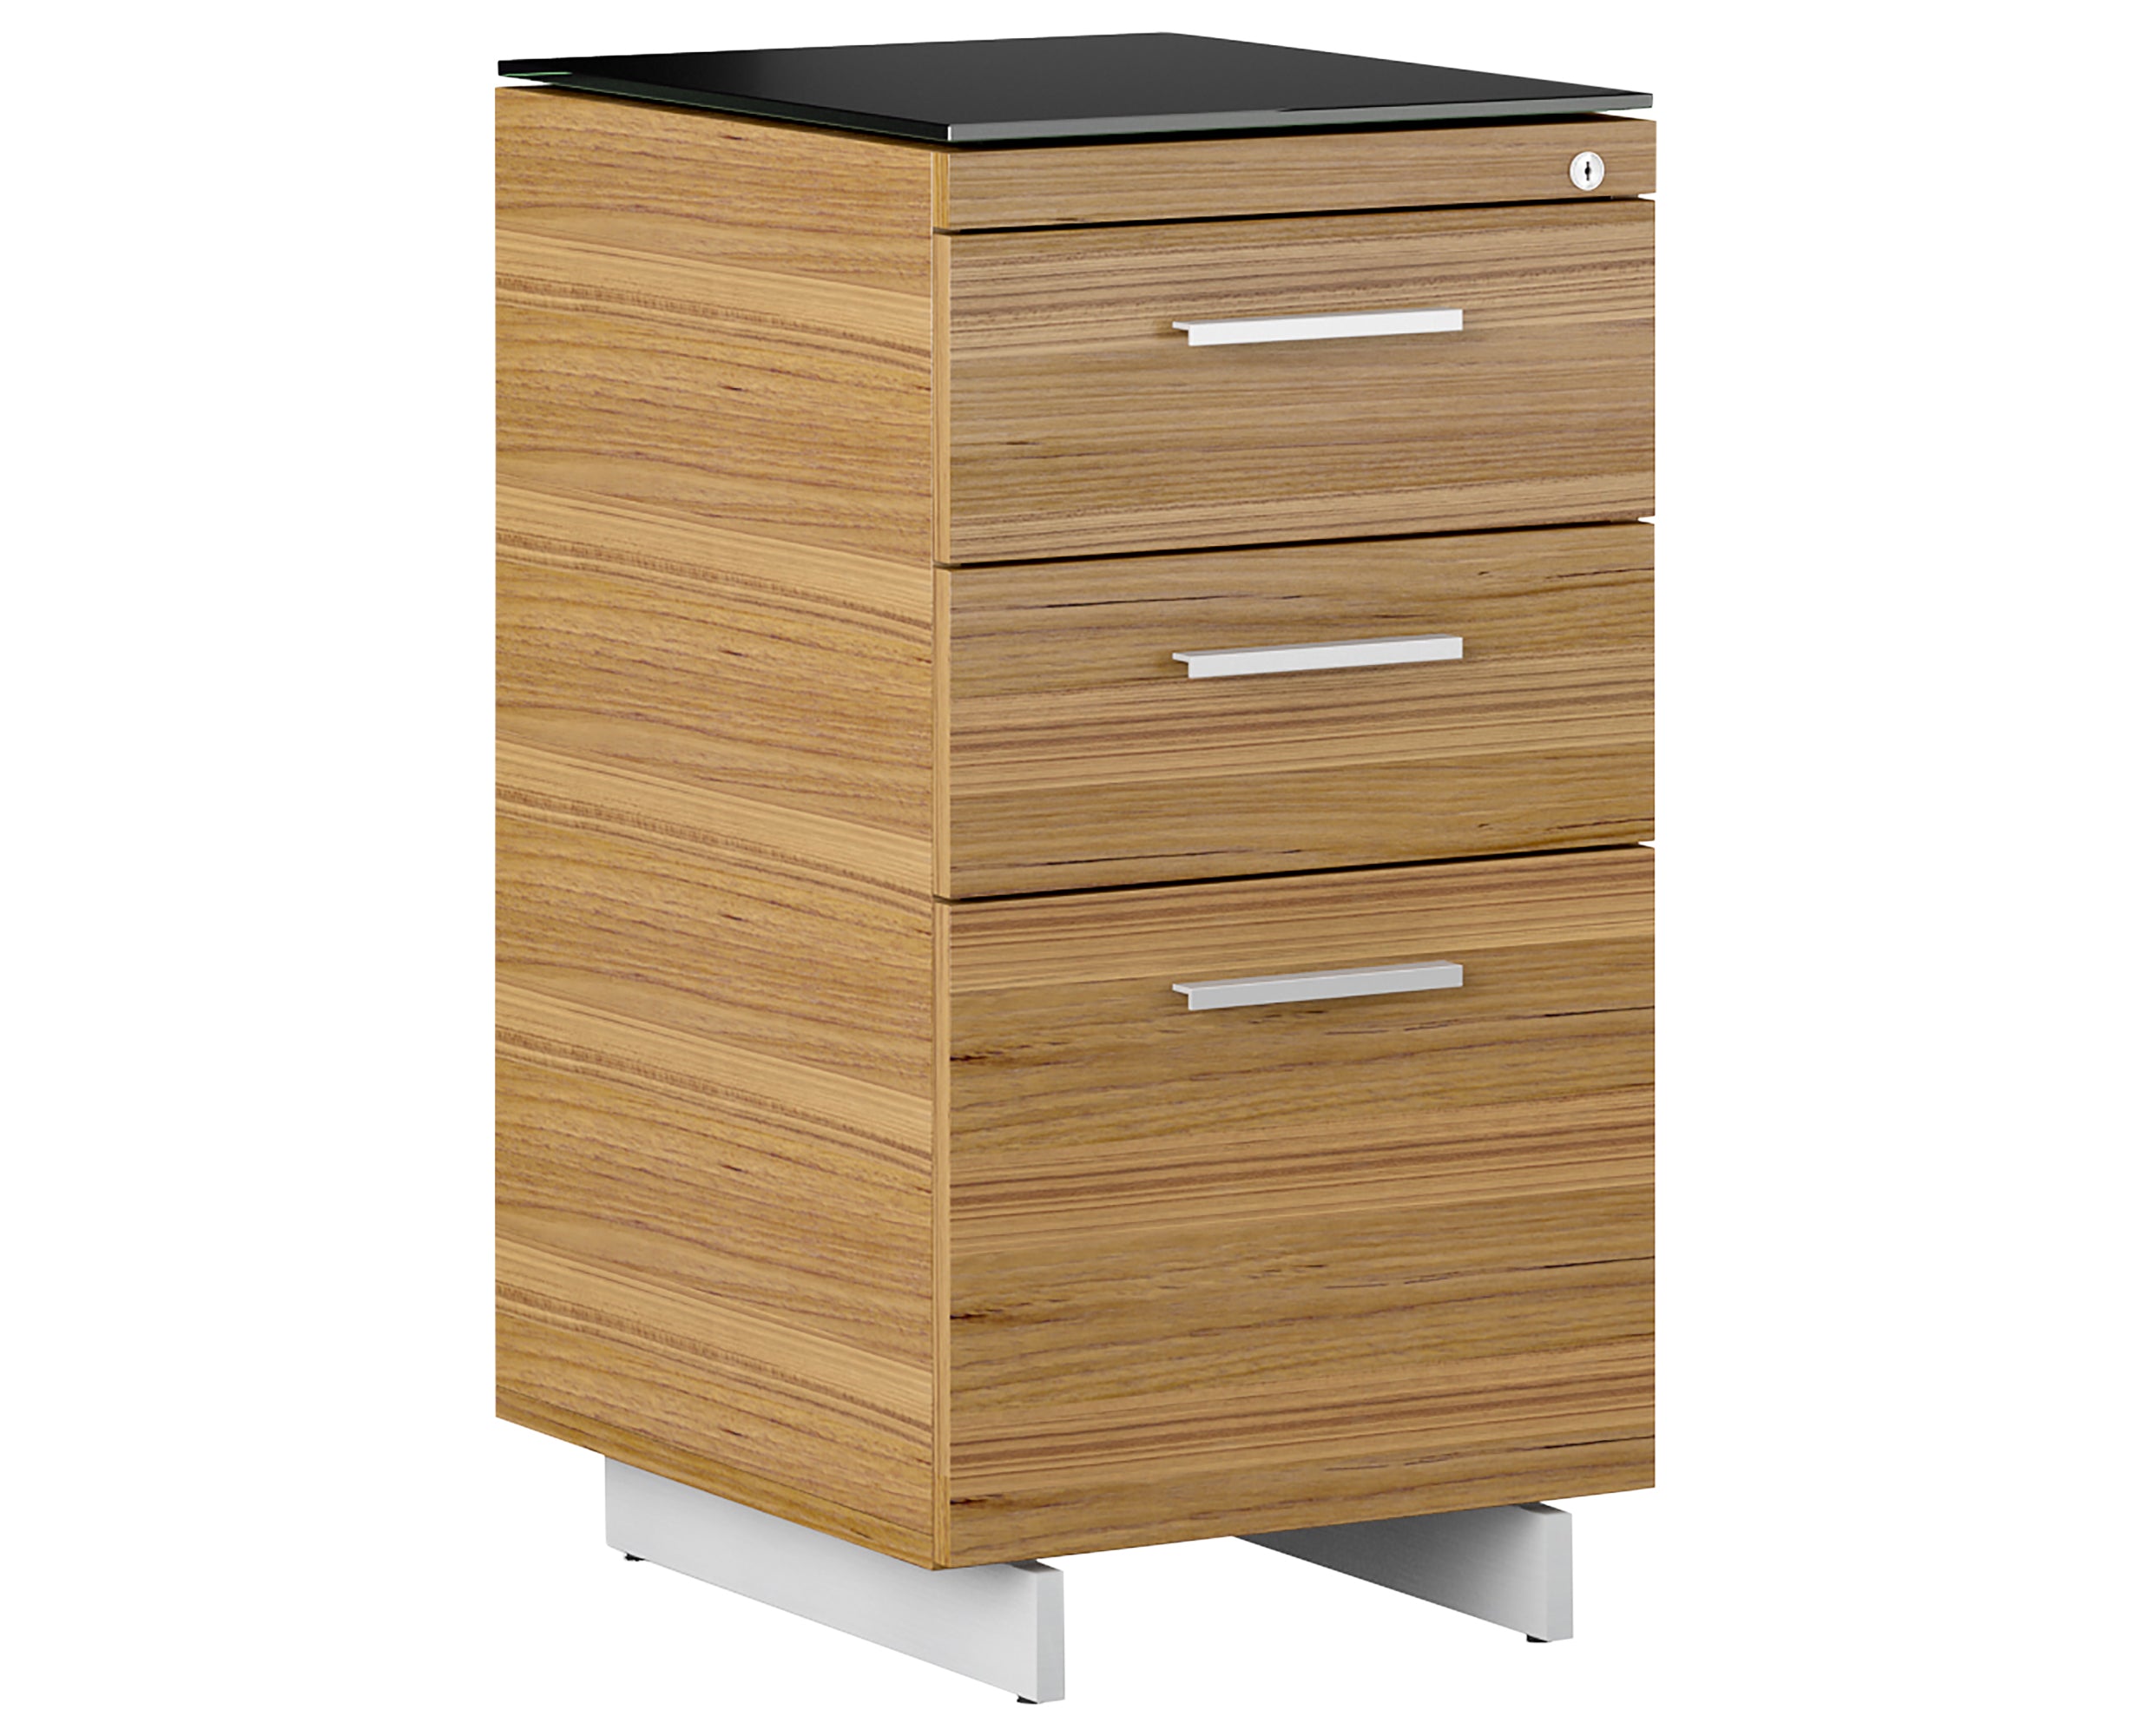 Natural Walnut Veneer and Black Satin-Etched Glass with Satin Nickel Steel | BDI Sequel 3 Drawer File Cabinet | Valley Ridge Furniture